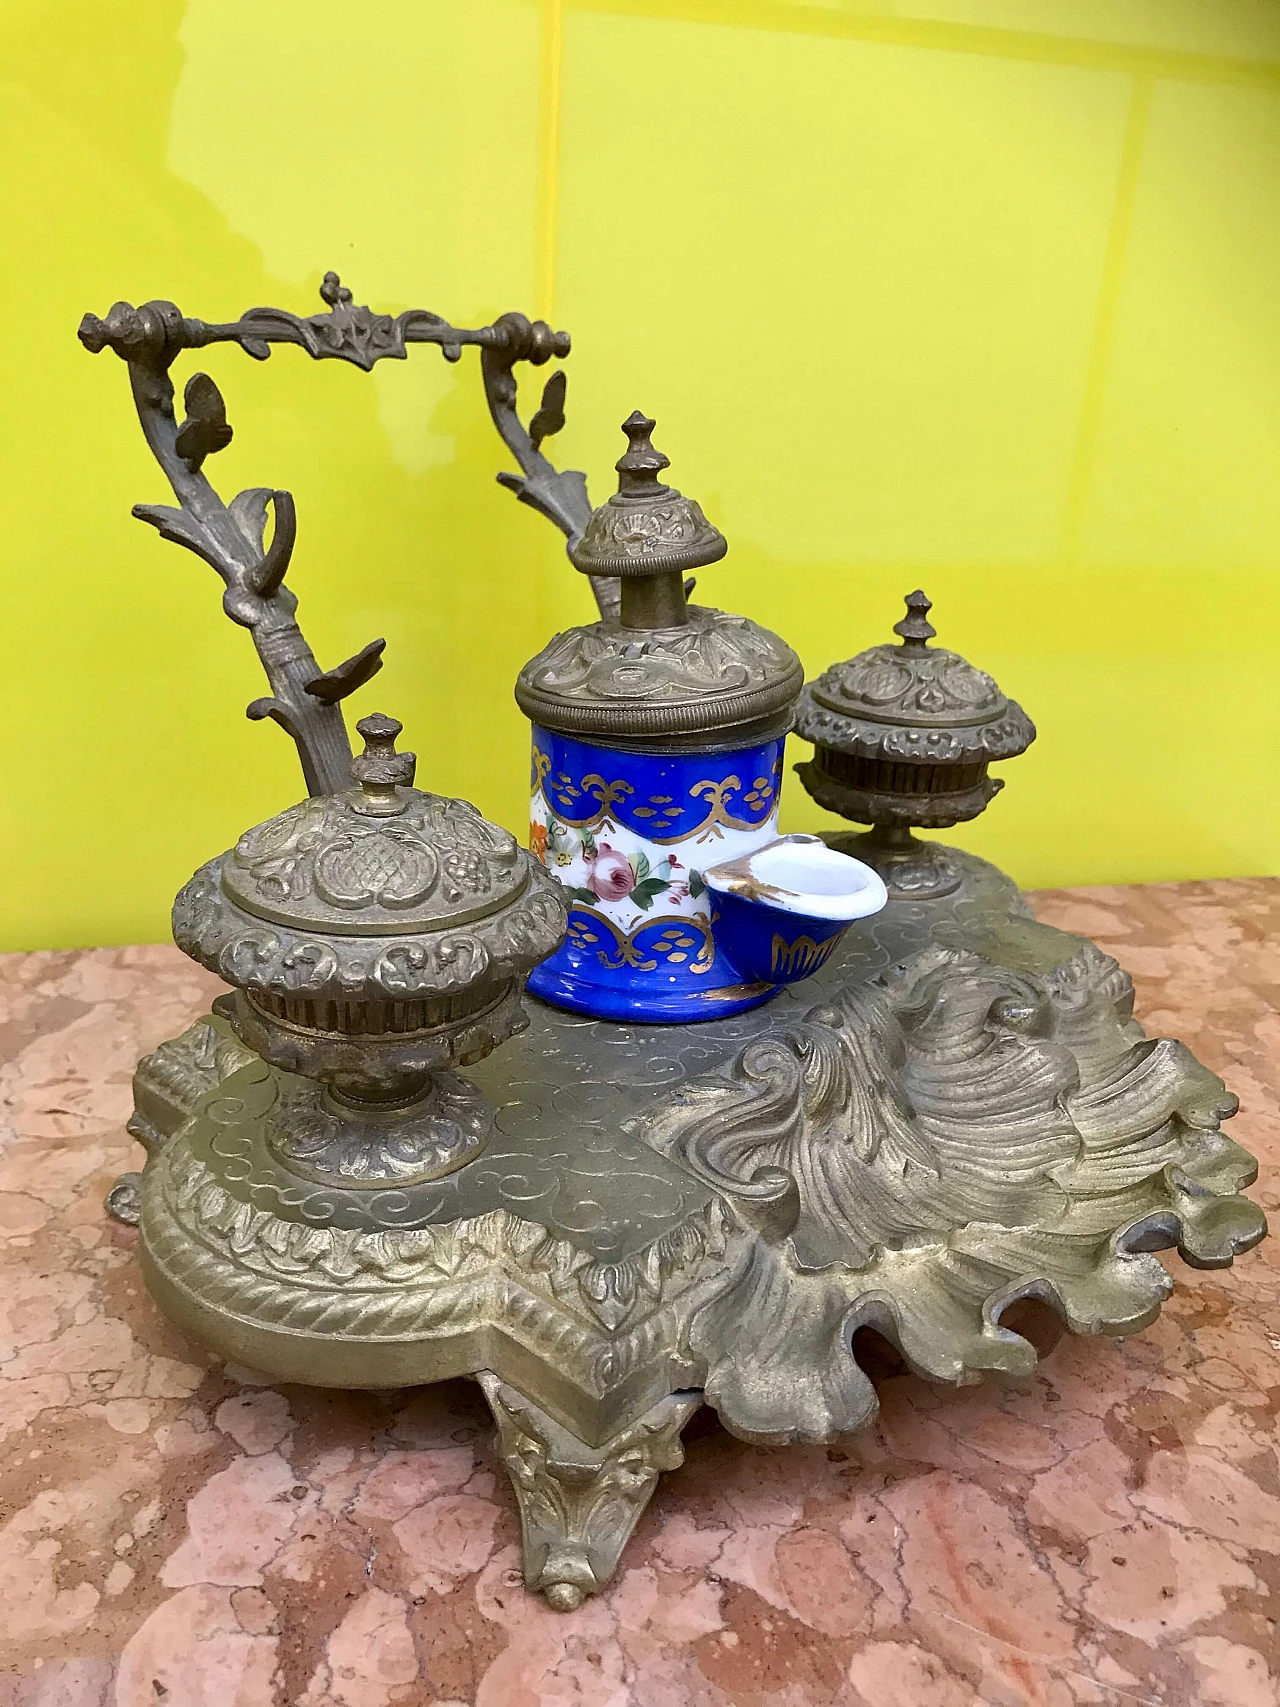 Sevrès porcelain and bronze inkwell with Pen Holder, 19th century 1167747